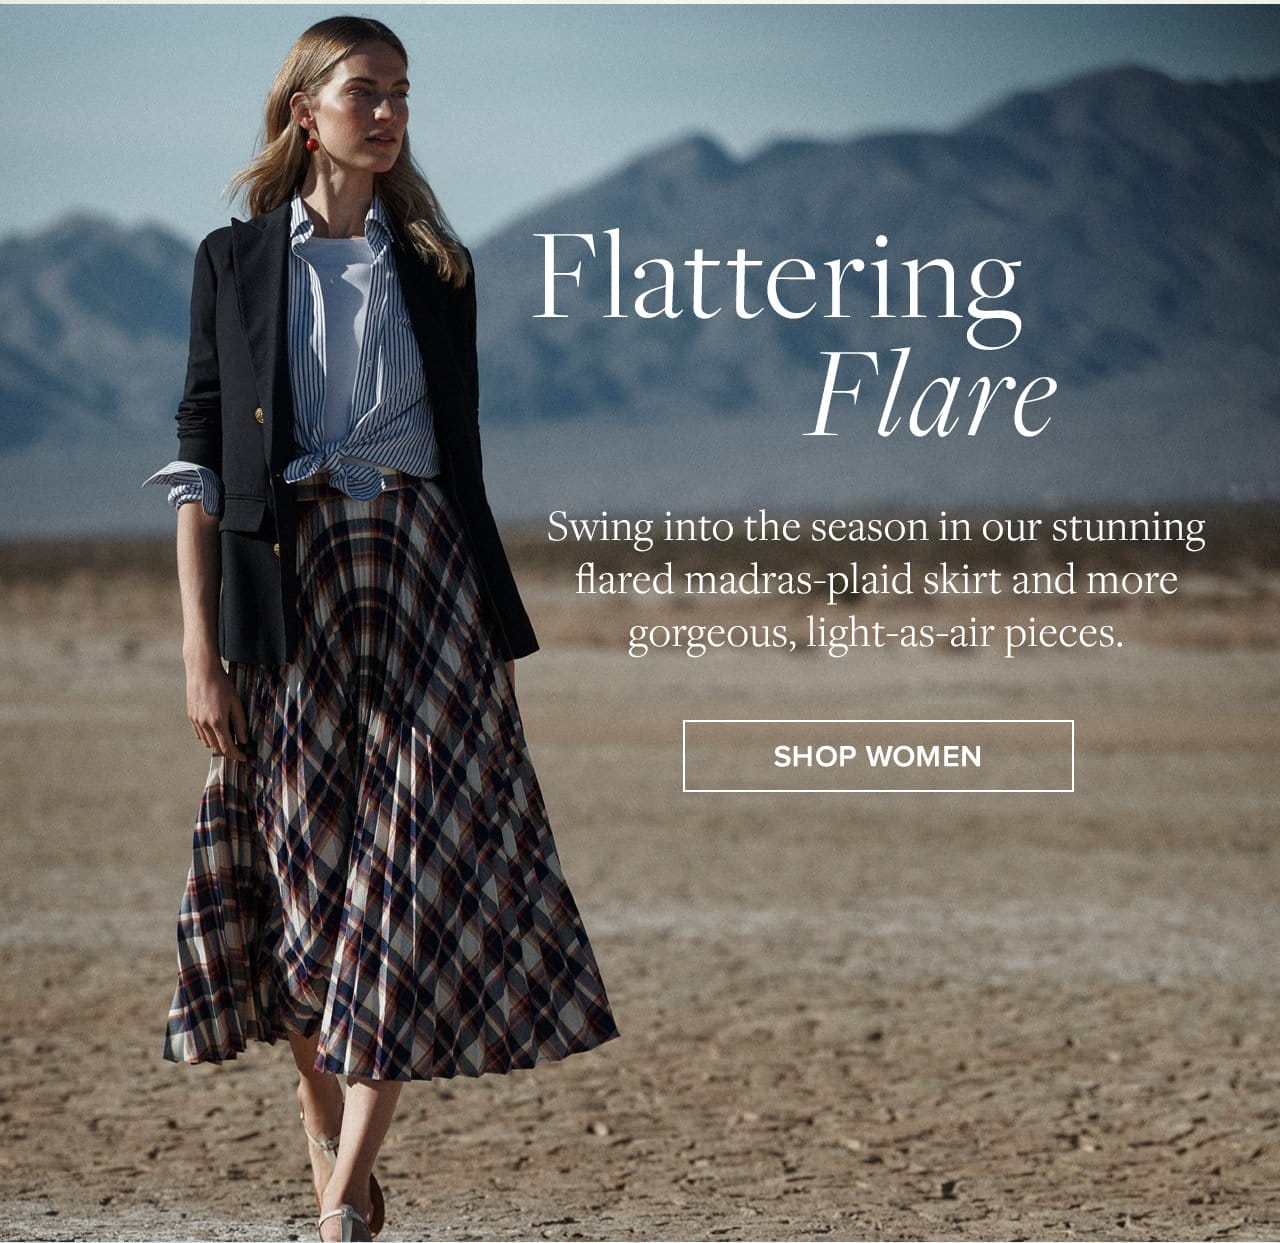 Flattering Flare Swing into the season in our stunning flared madras-plaid skirt and more gorgeous, light-as-air pieces. Shop Women